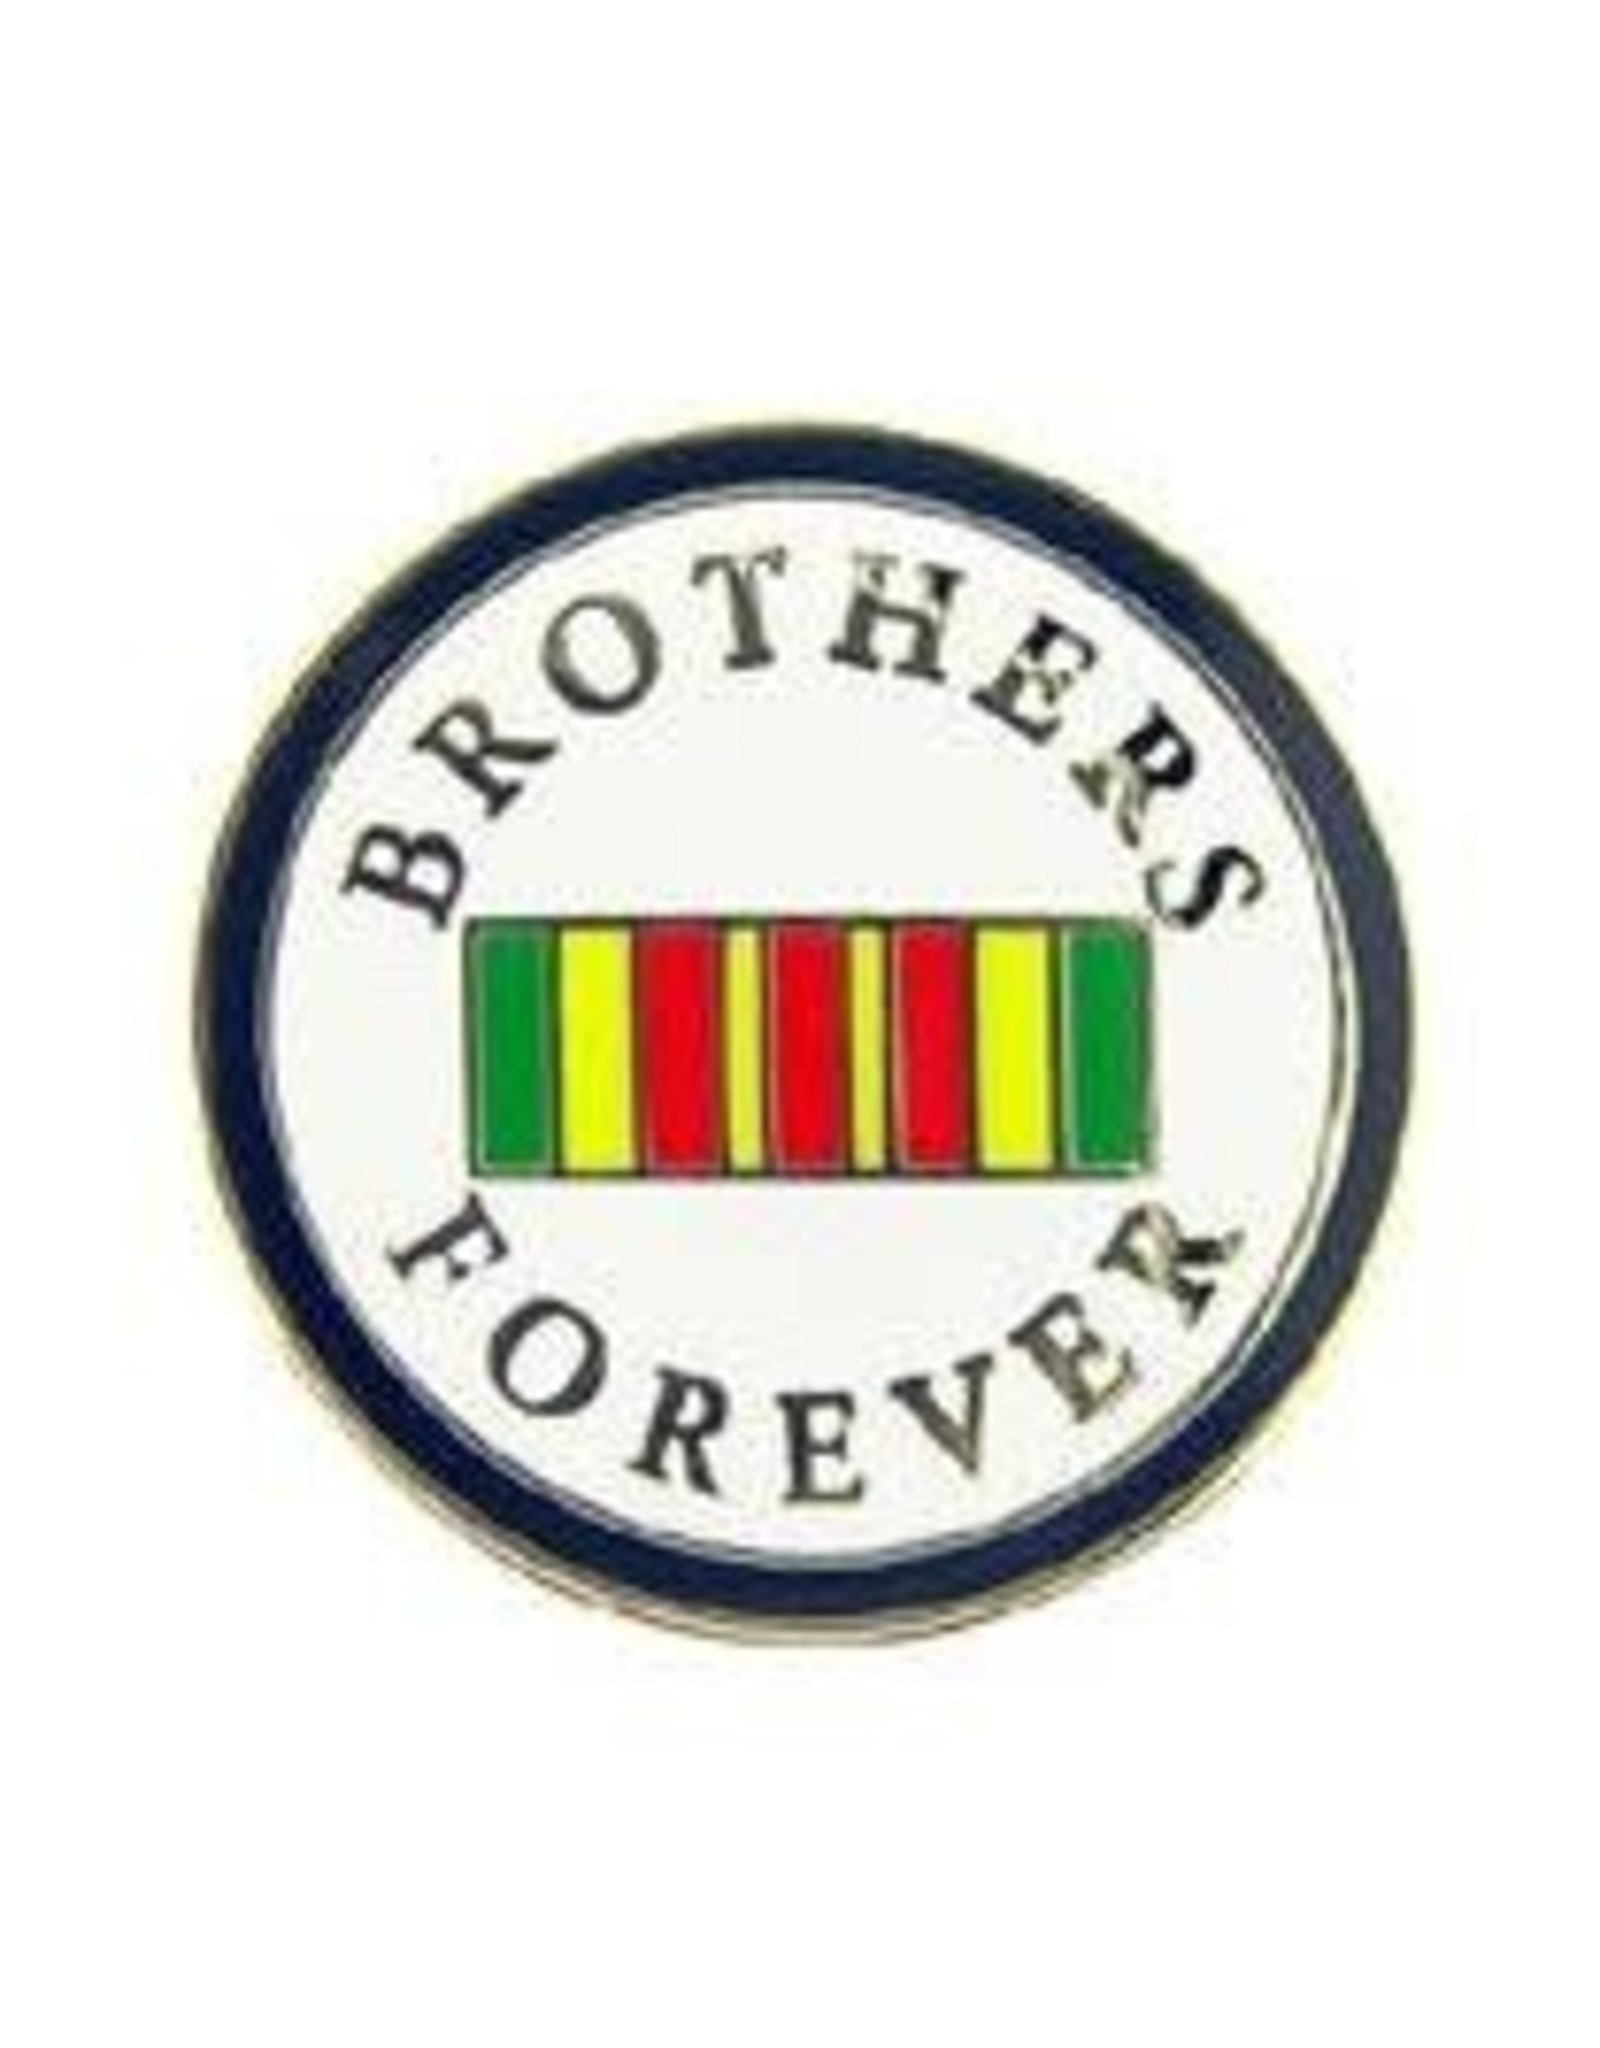 Pin - Vietnam Brothers Forever